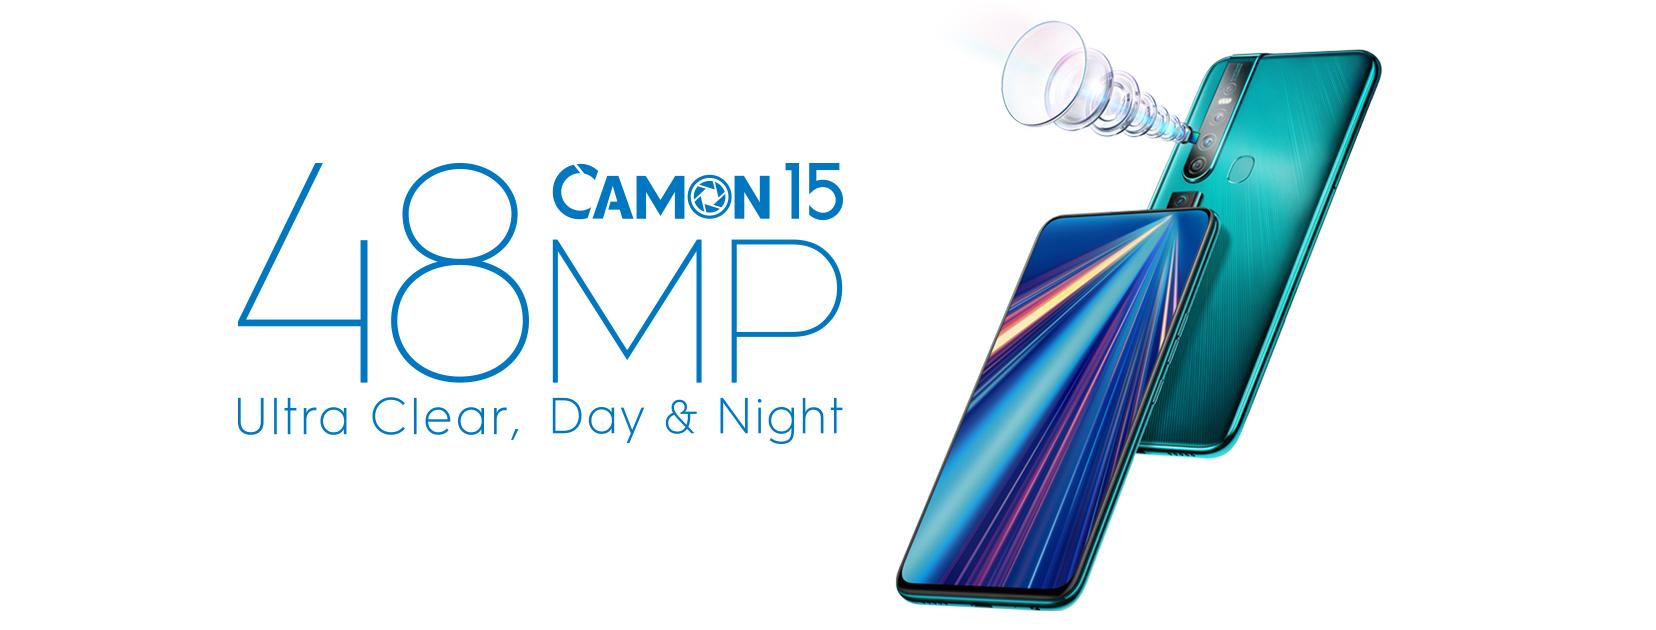 TECNO finally uncovers the name of its upcoming model – Camon 15